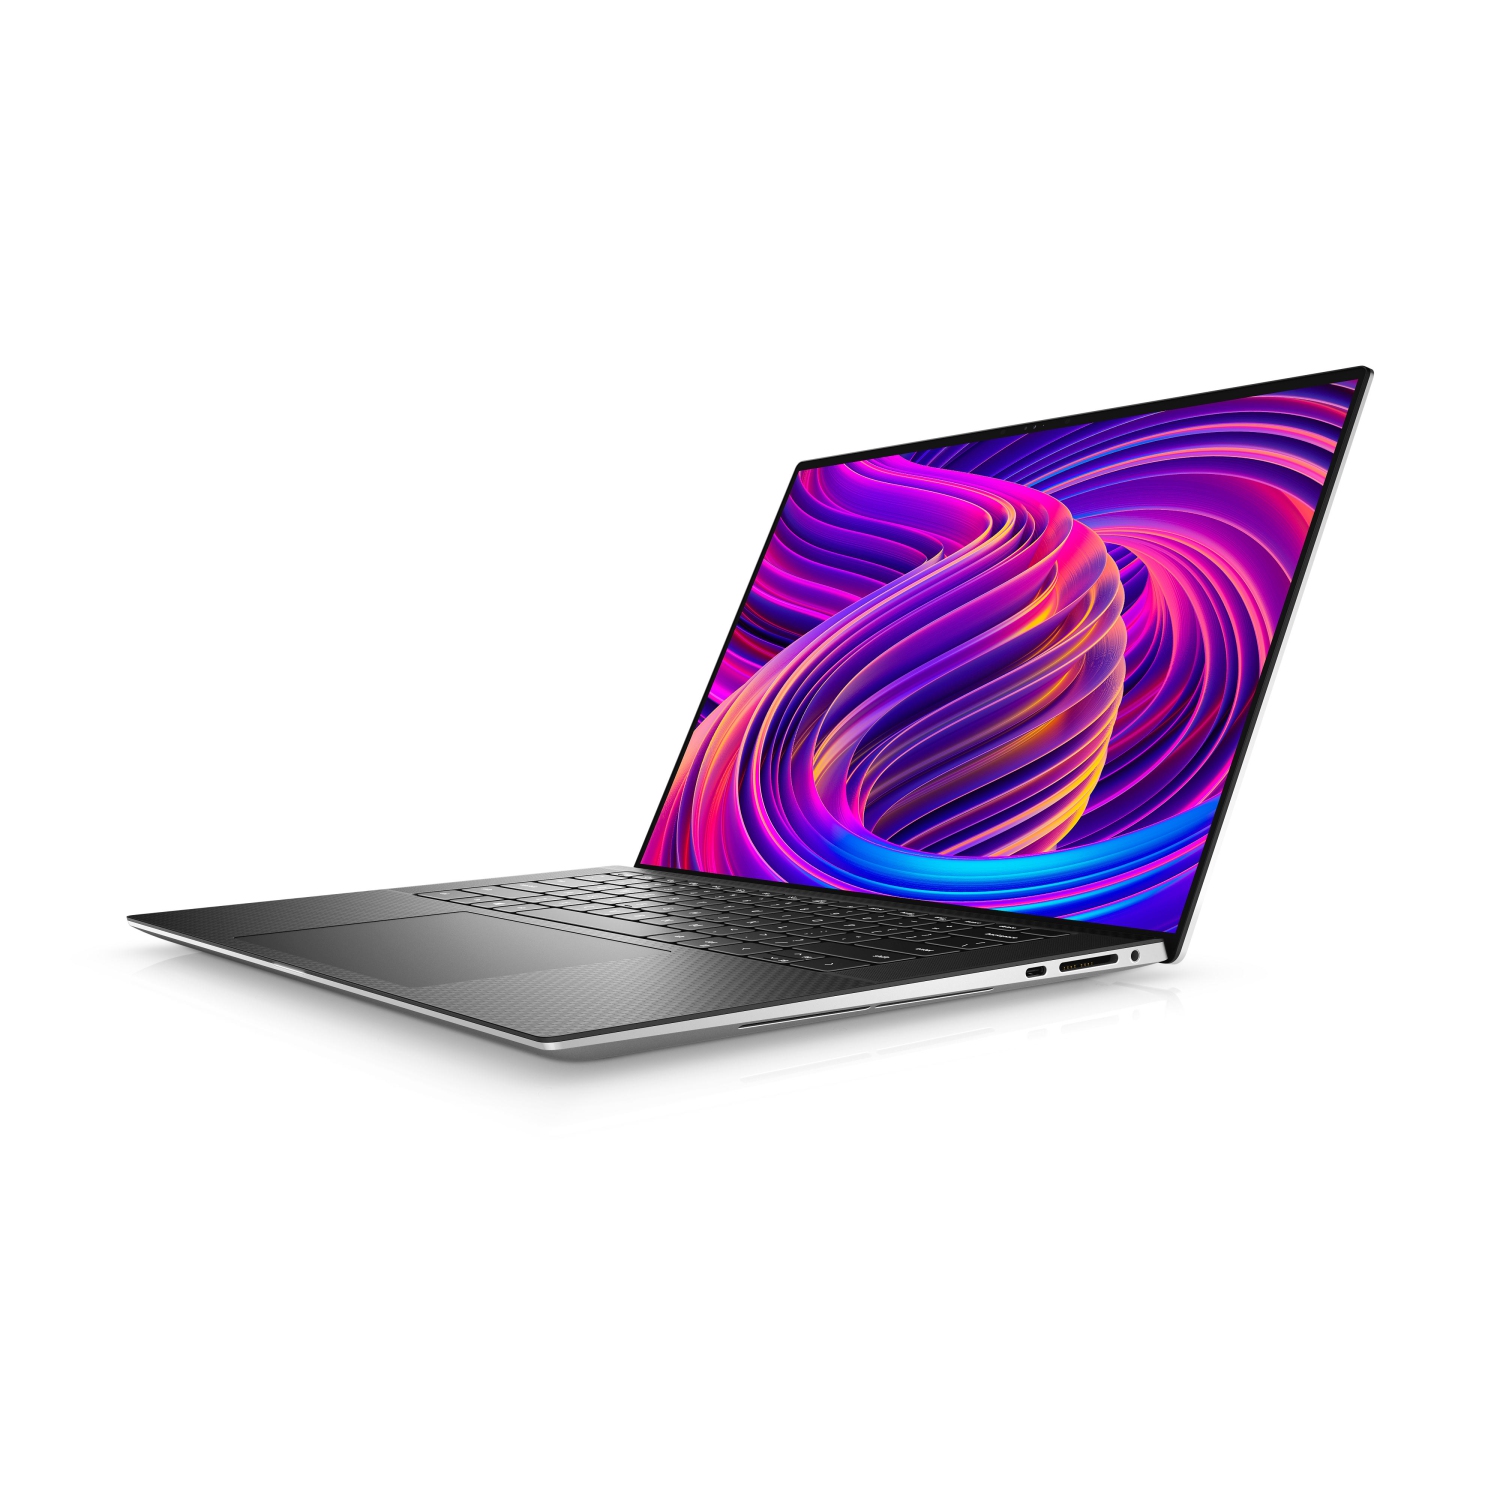 Refurbished (Excellent) - Dell XPS 15 9510 Laptop (2021) | 15.6" FHD+ | Core i7 - 512GB SSD - 16GB RAM - RTX 3050 | 8 Cores @ 4.6 GHz - 11th Gen CPU Certified Refurbished